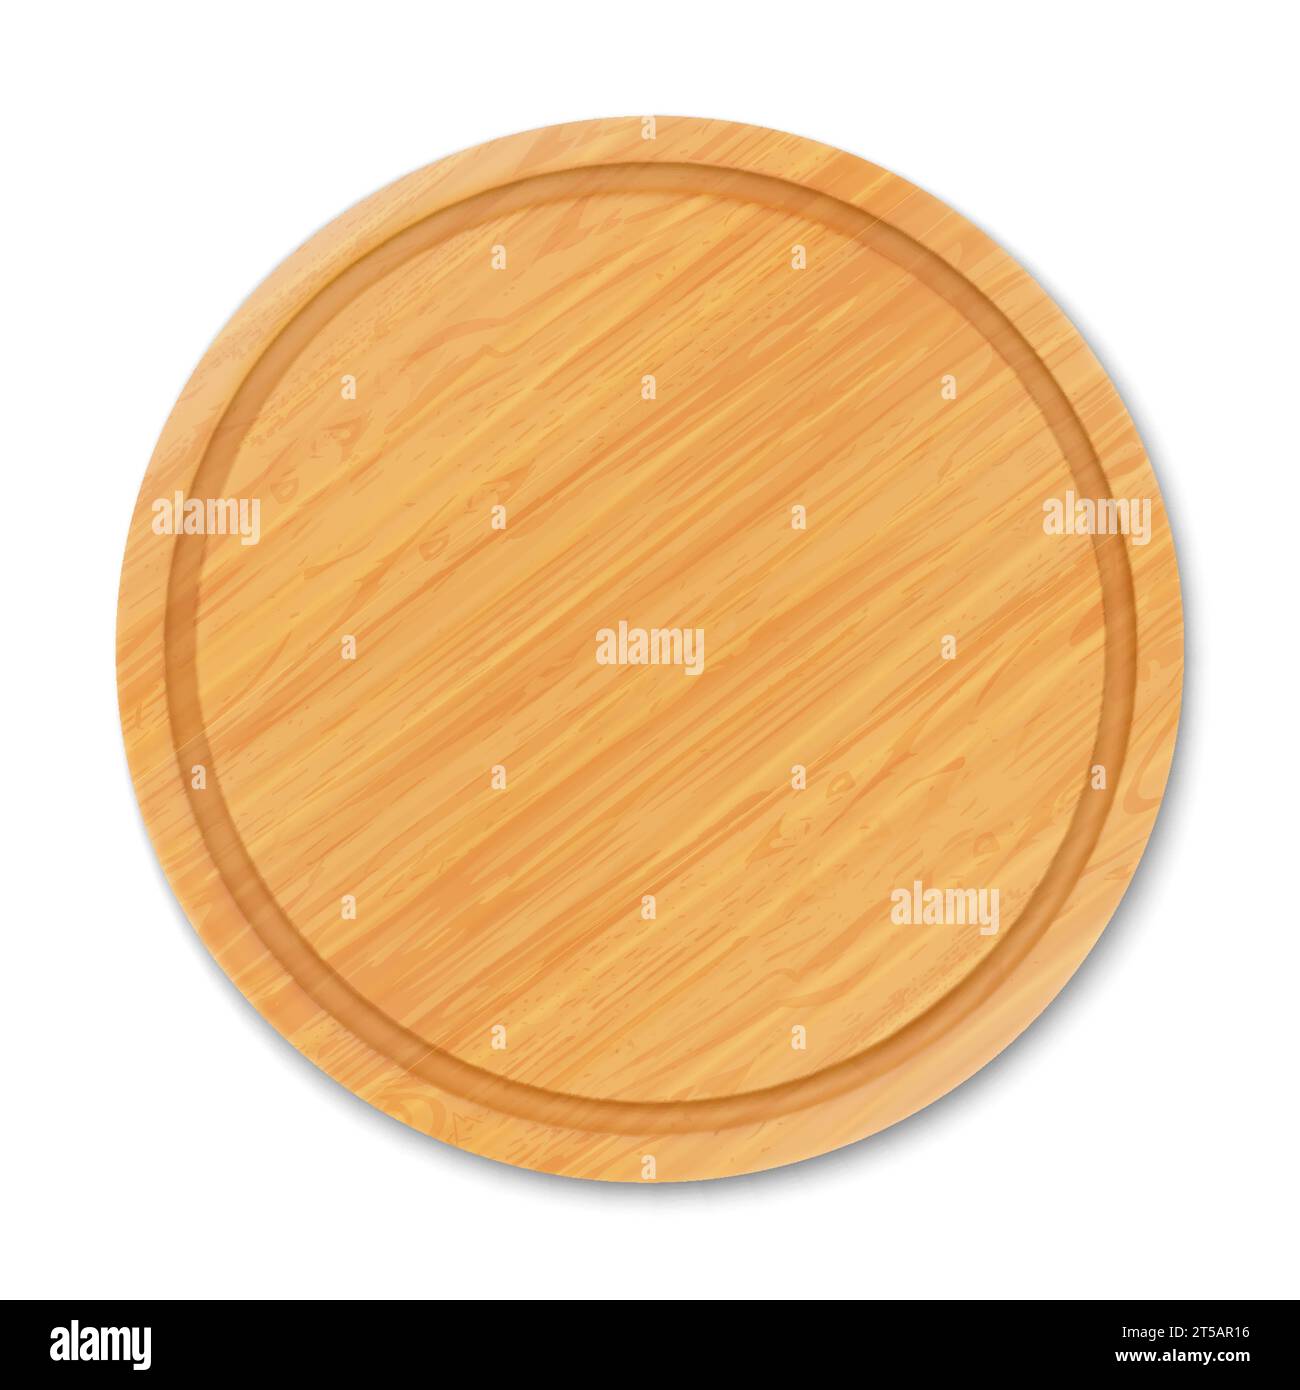 Empty round wooden cutting board, top view. Trays or plate of round shapes, natural, eco-friendly kitchen utensils made of wood isolated on white back Stock Vector